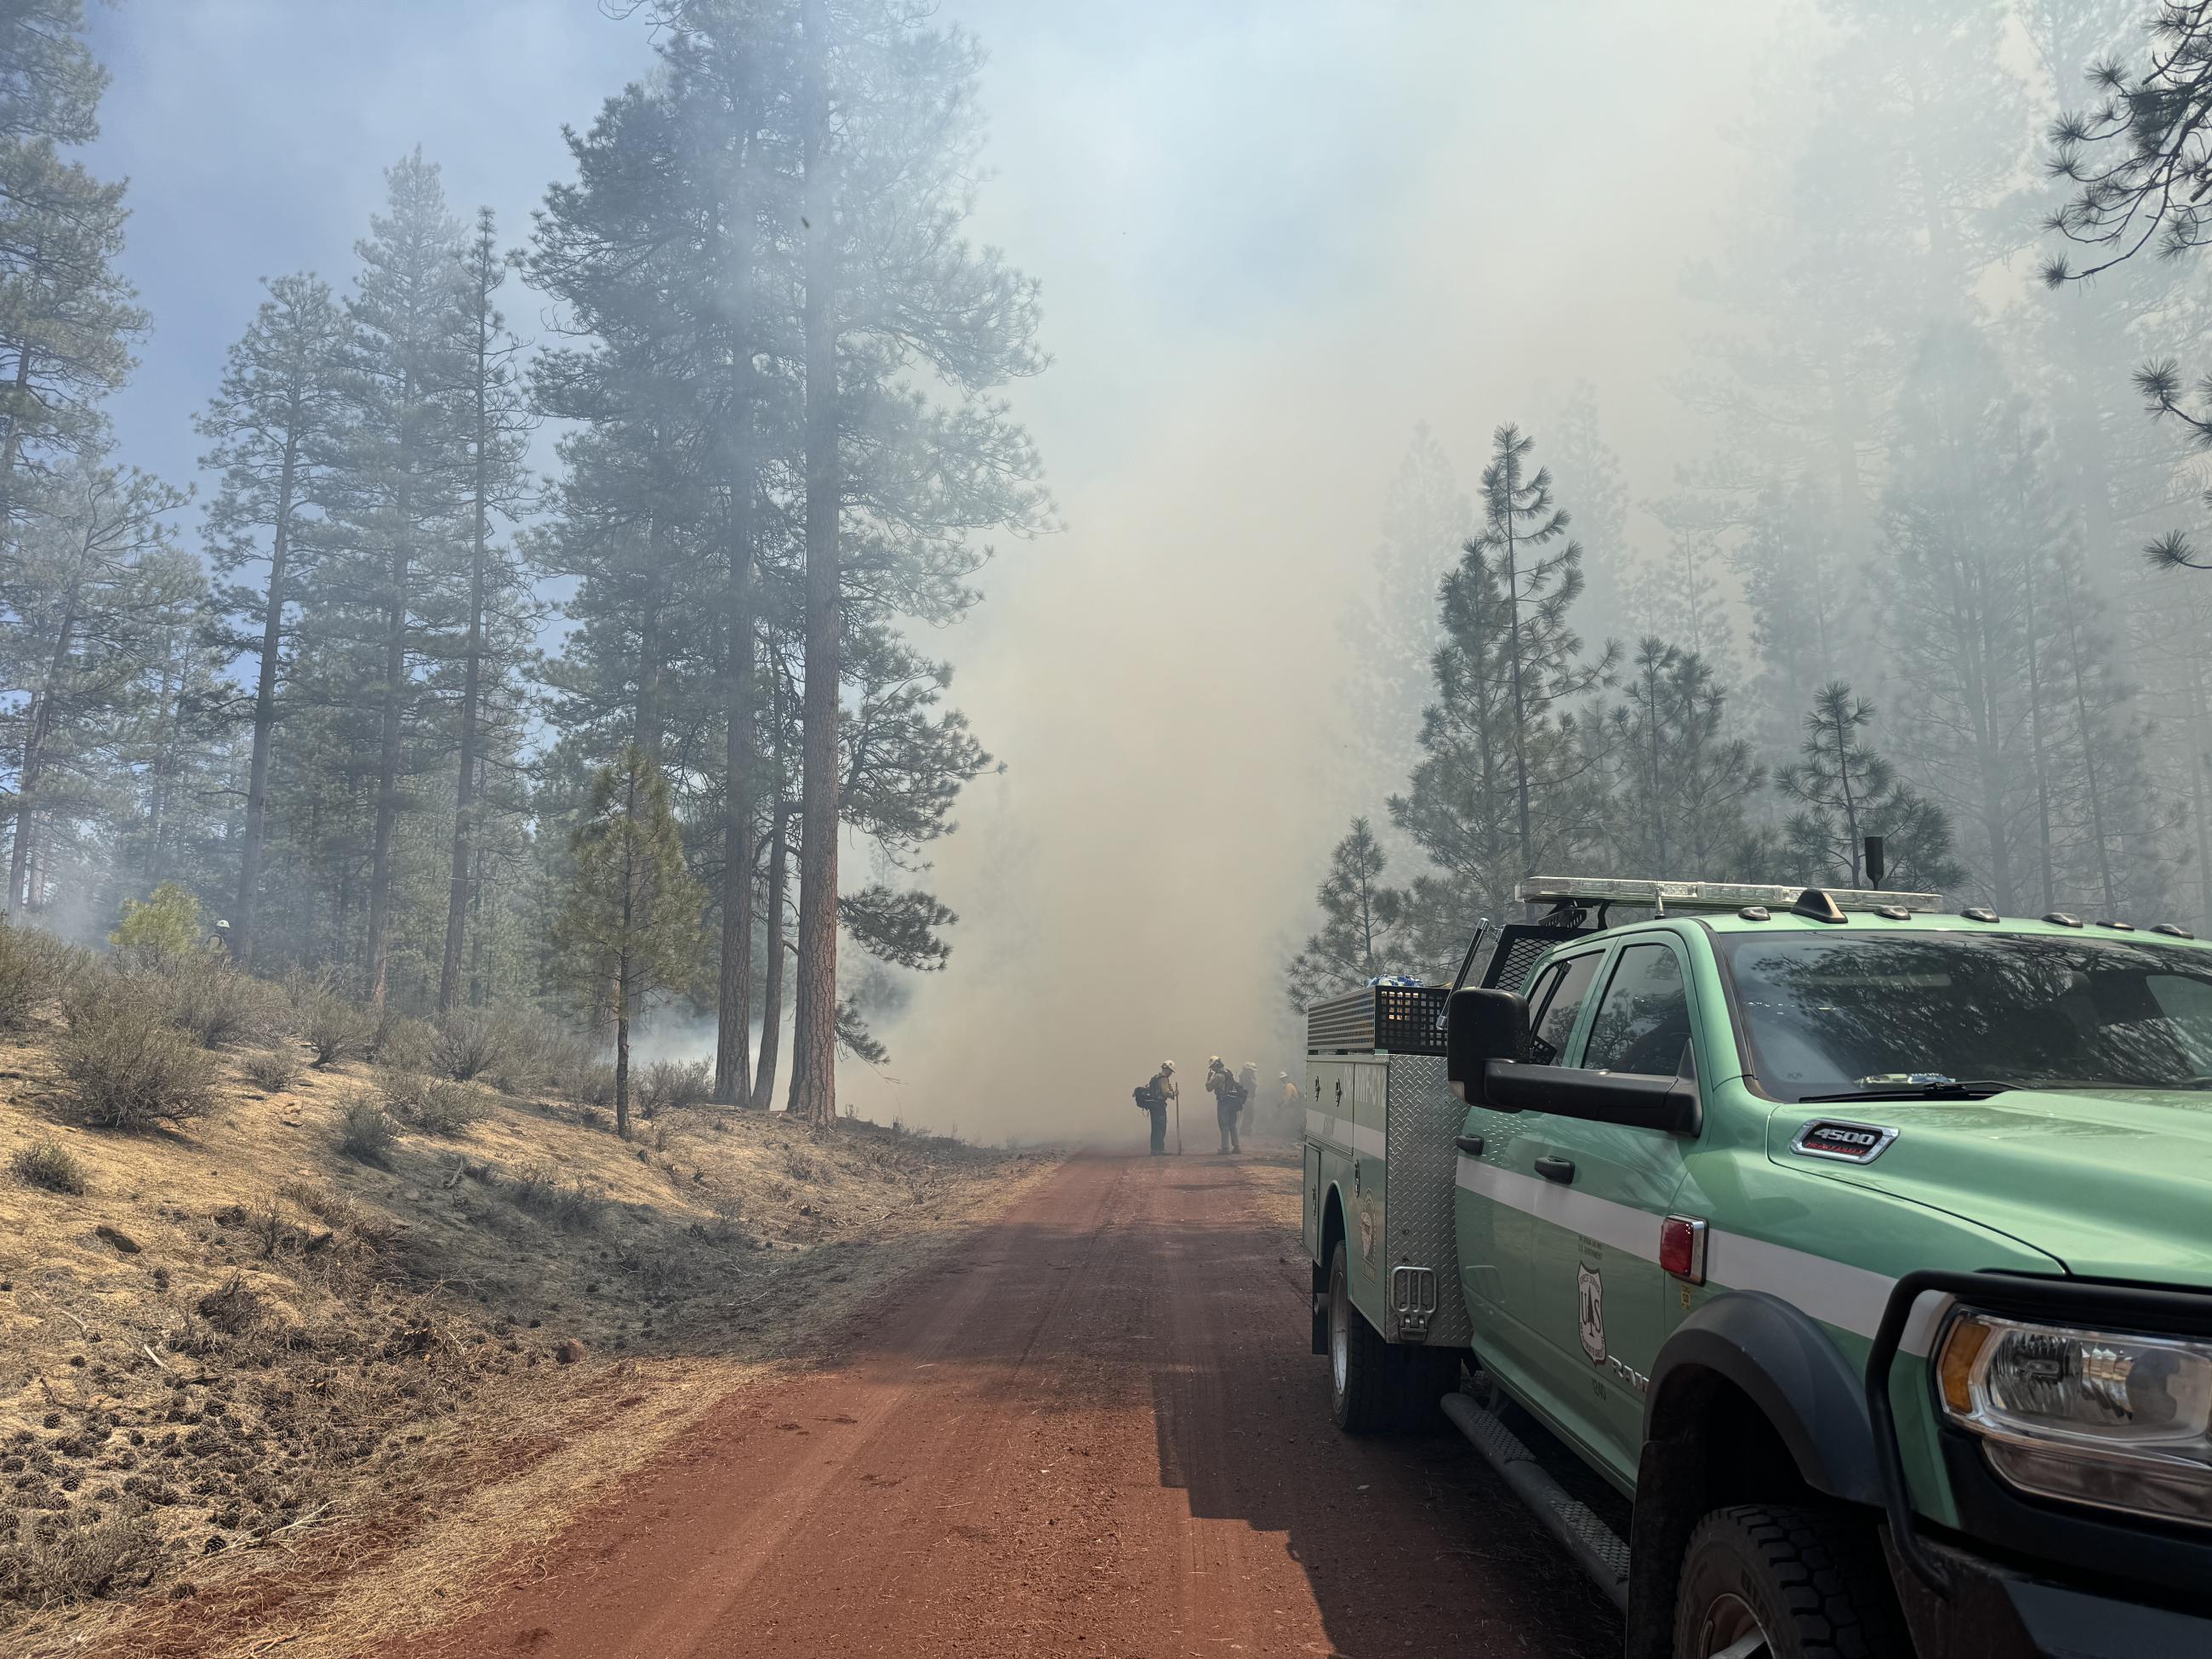 Firefighters holding the Road during Firing Operation